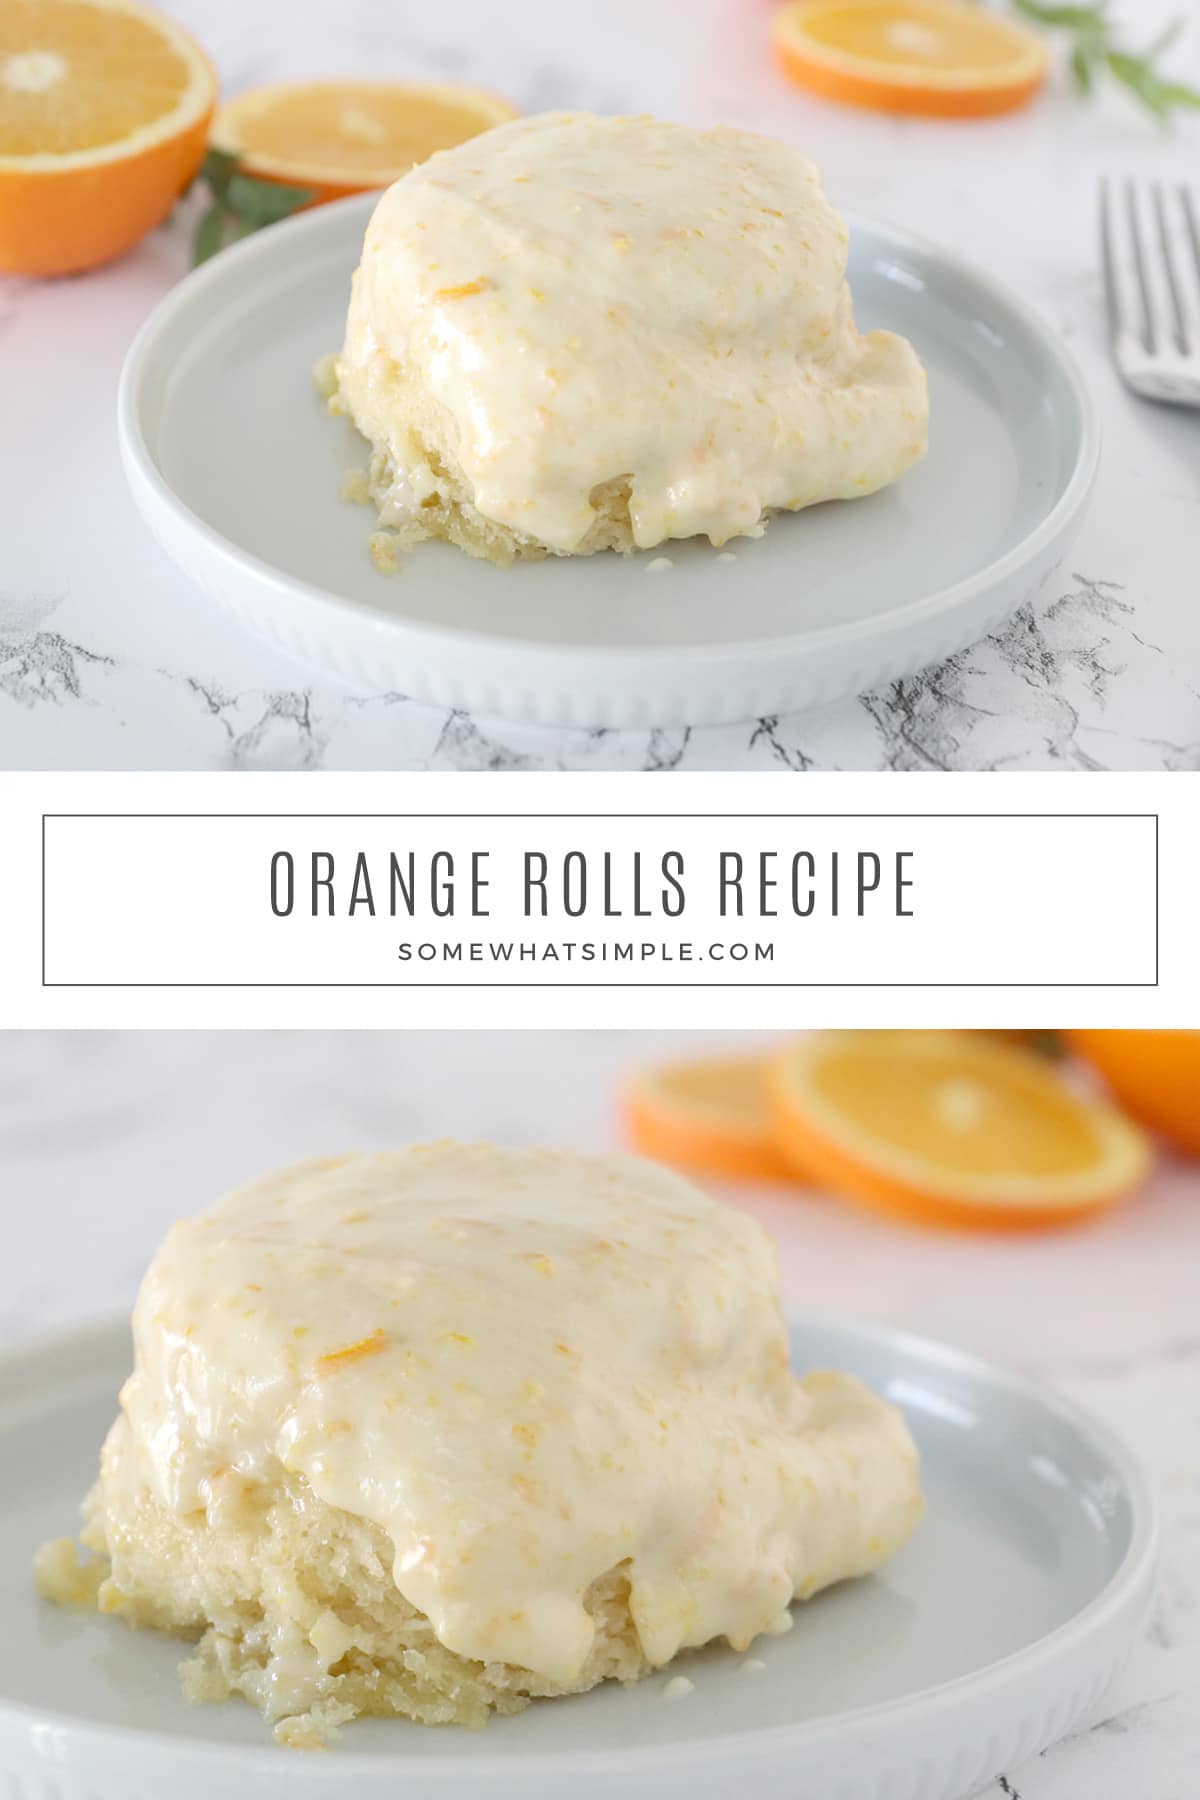 These Orange Rolls are easy to make and are the perfect dish to serve at a holiday brunch! In less than 30 minutes, they bake up into golden rolls that are soft, chewy, and totally delicious! via @somewhatsimple